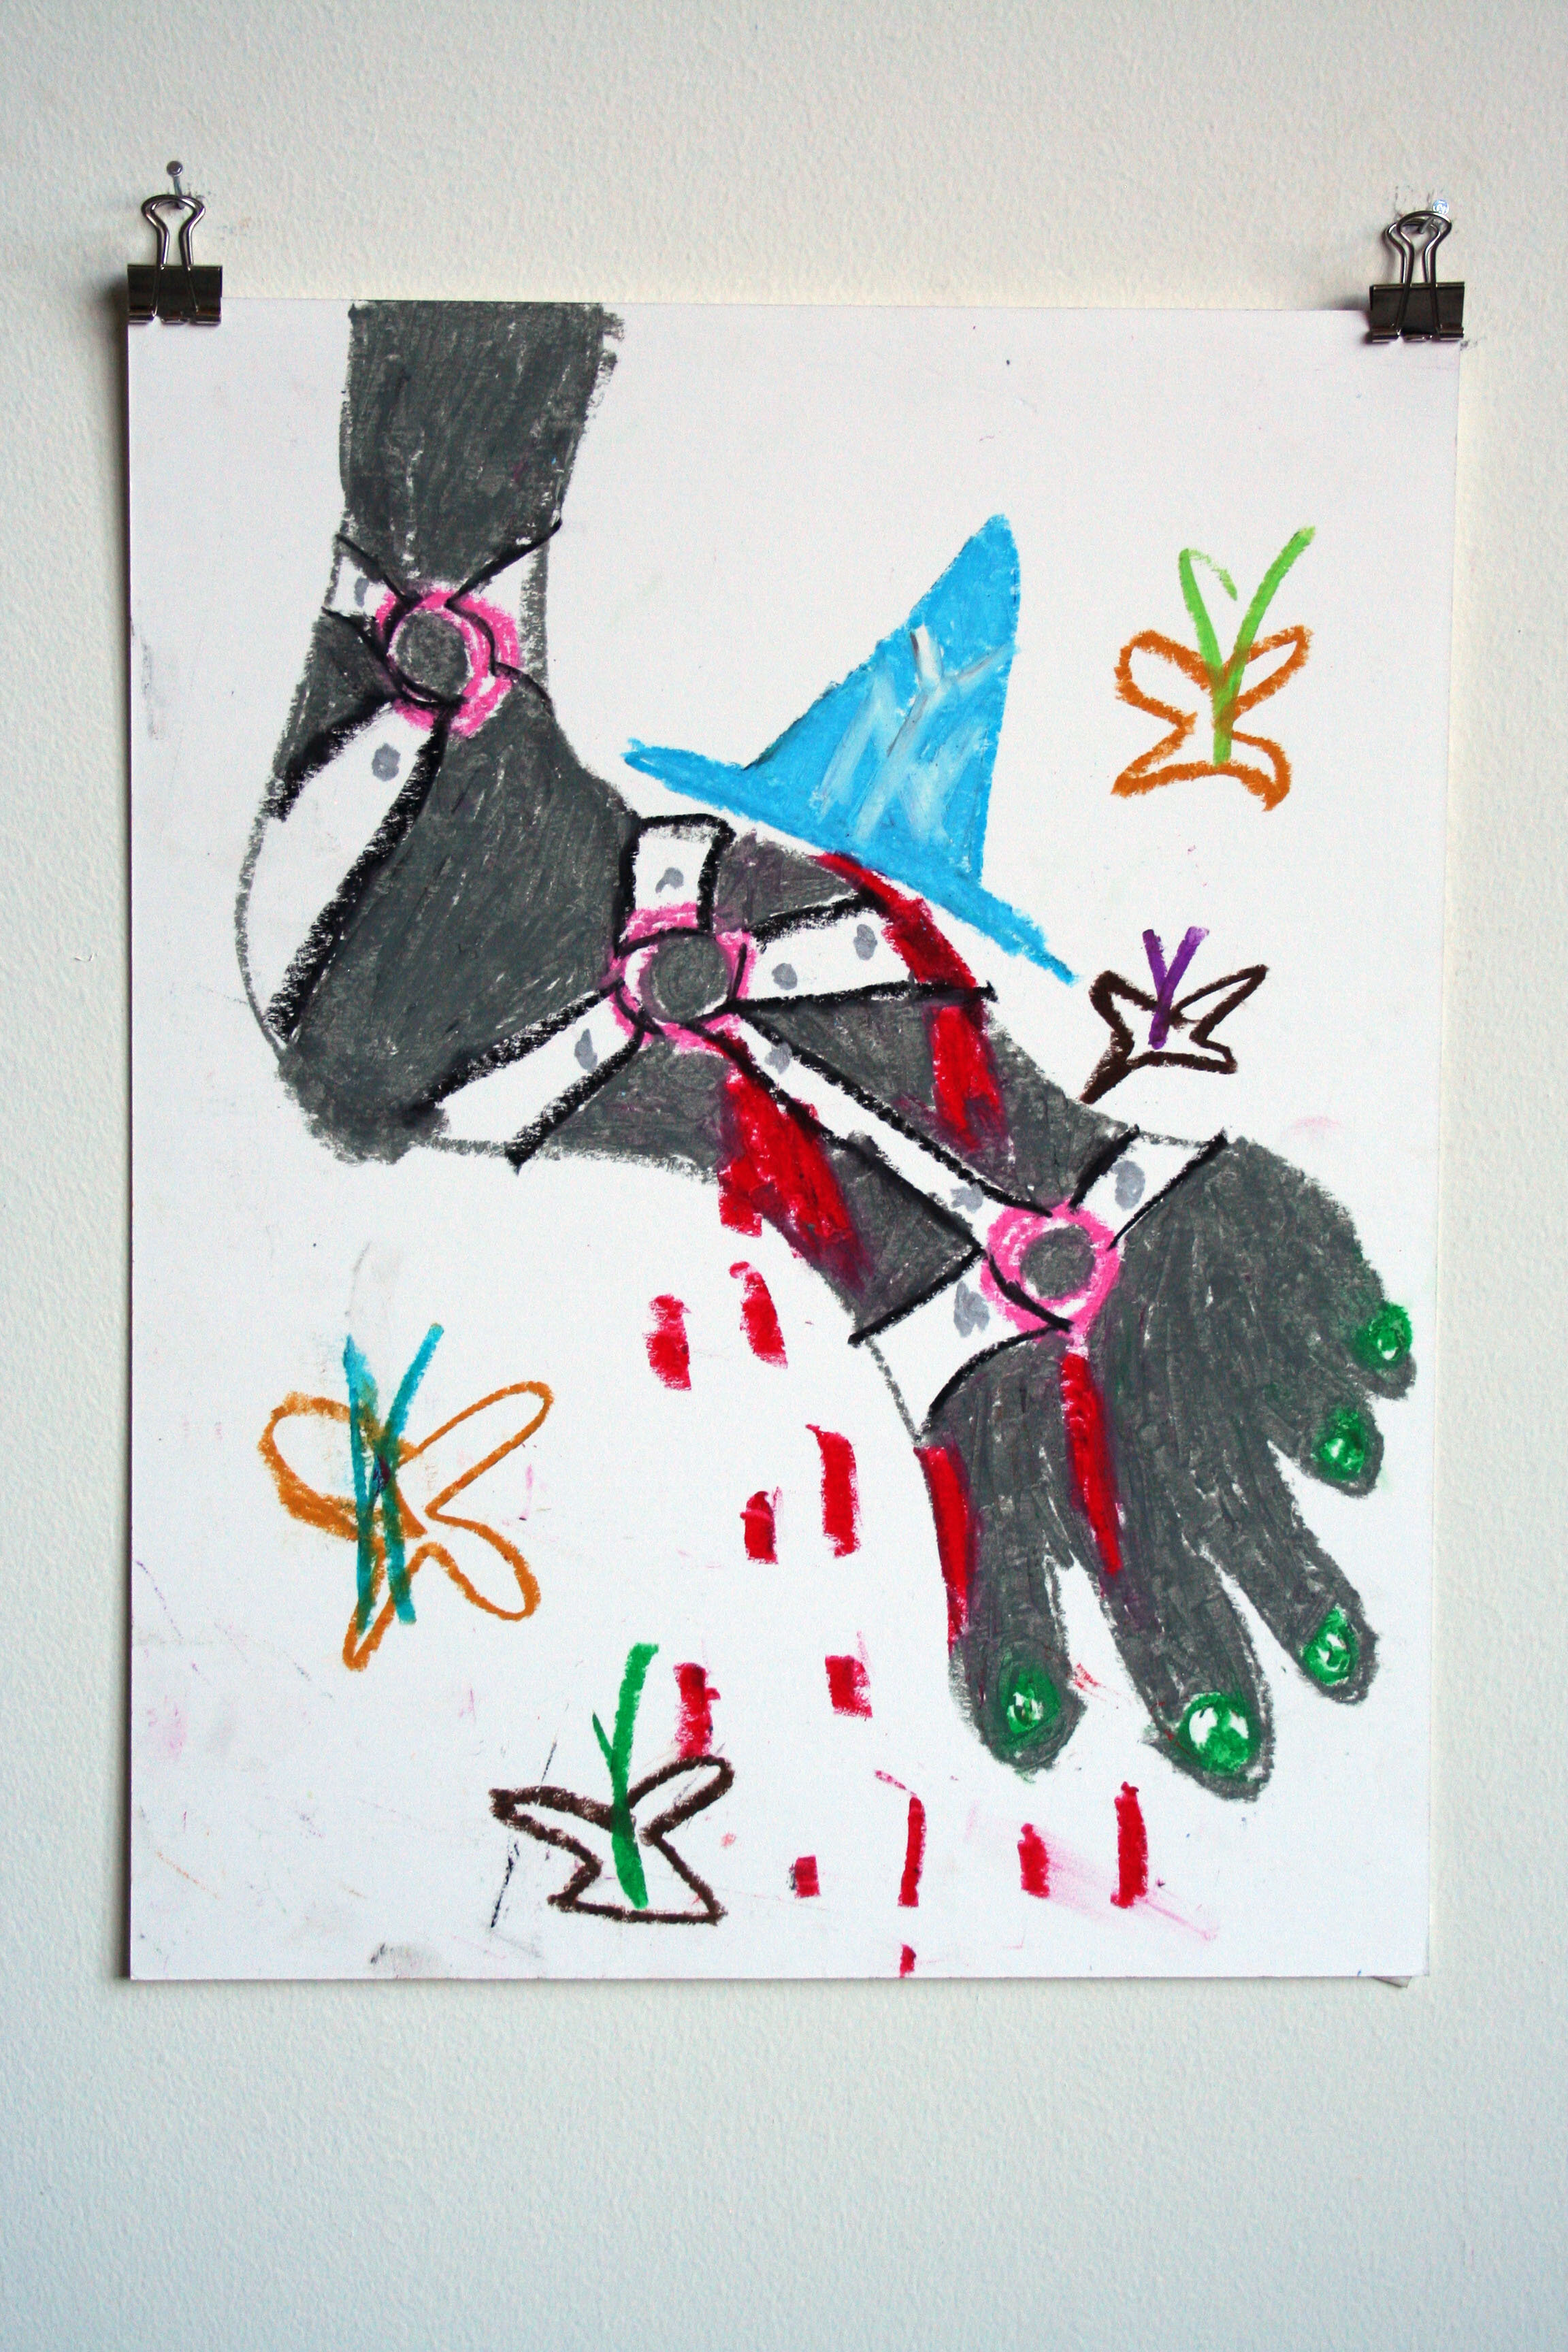   Foot Wearing Mini Witch Hat,  2014  14 x 11 inches (35.56 x 27.94 cm.)  Oil pastel on paper 